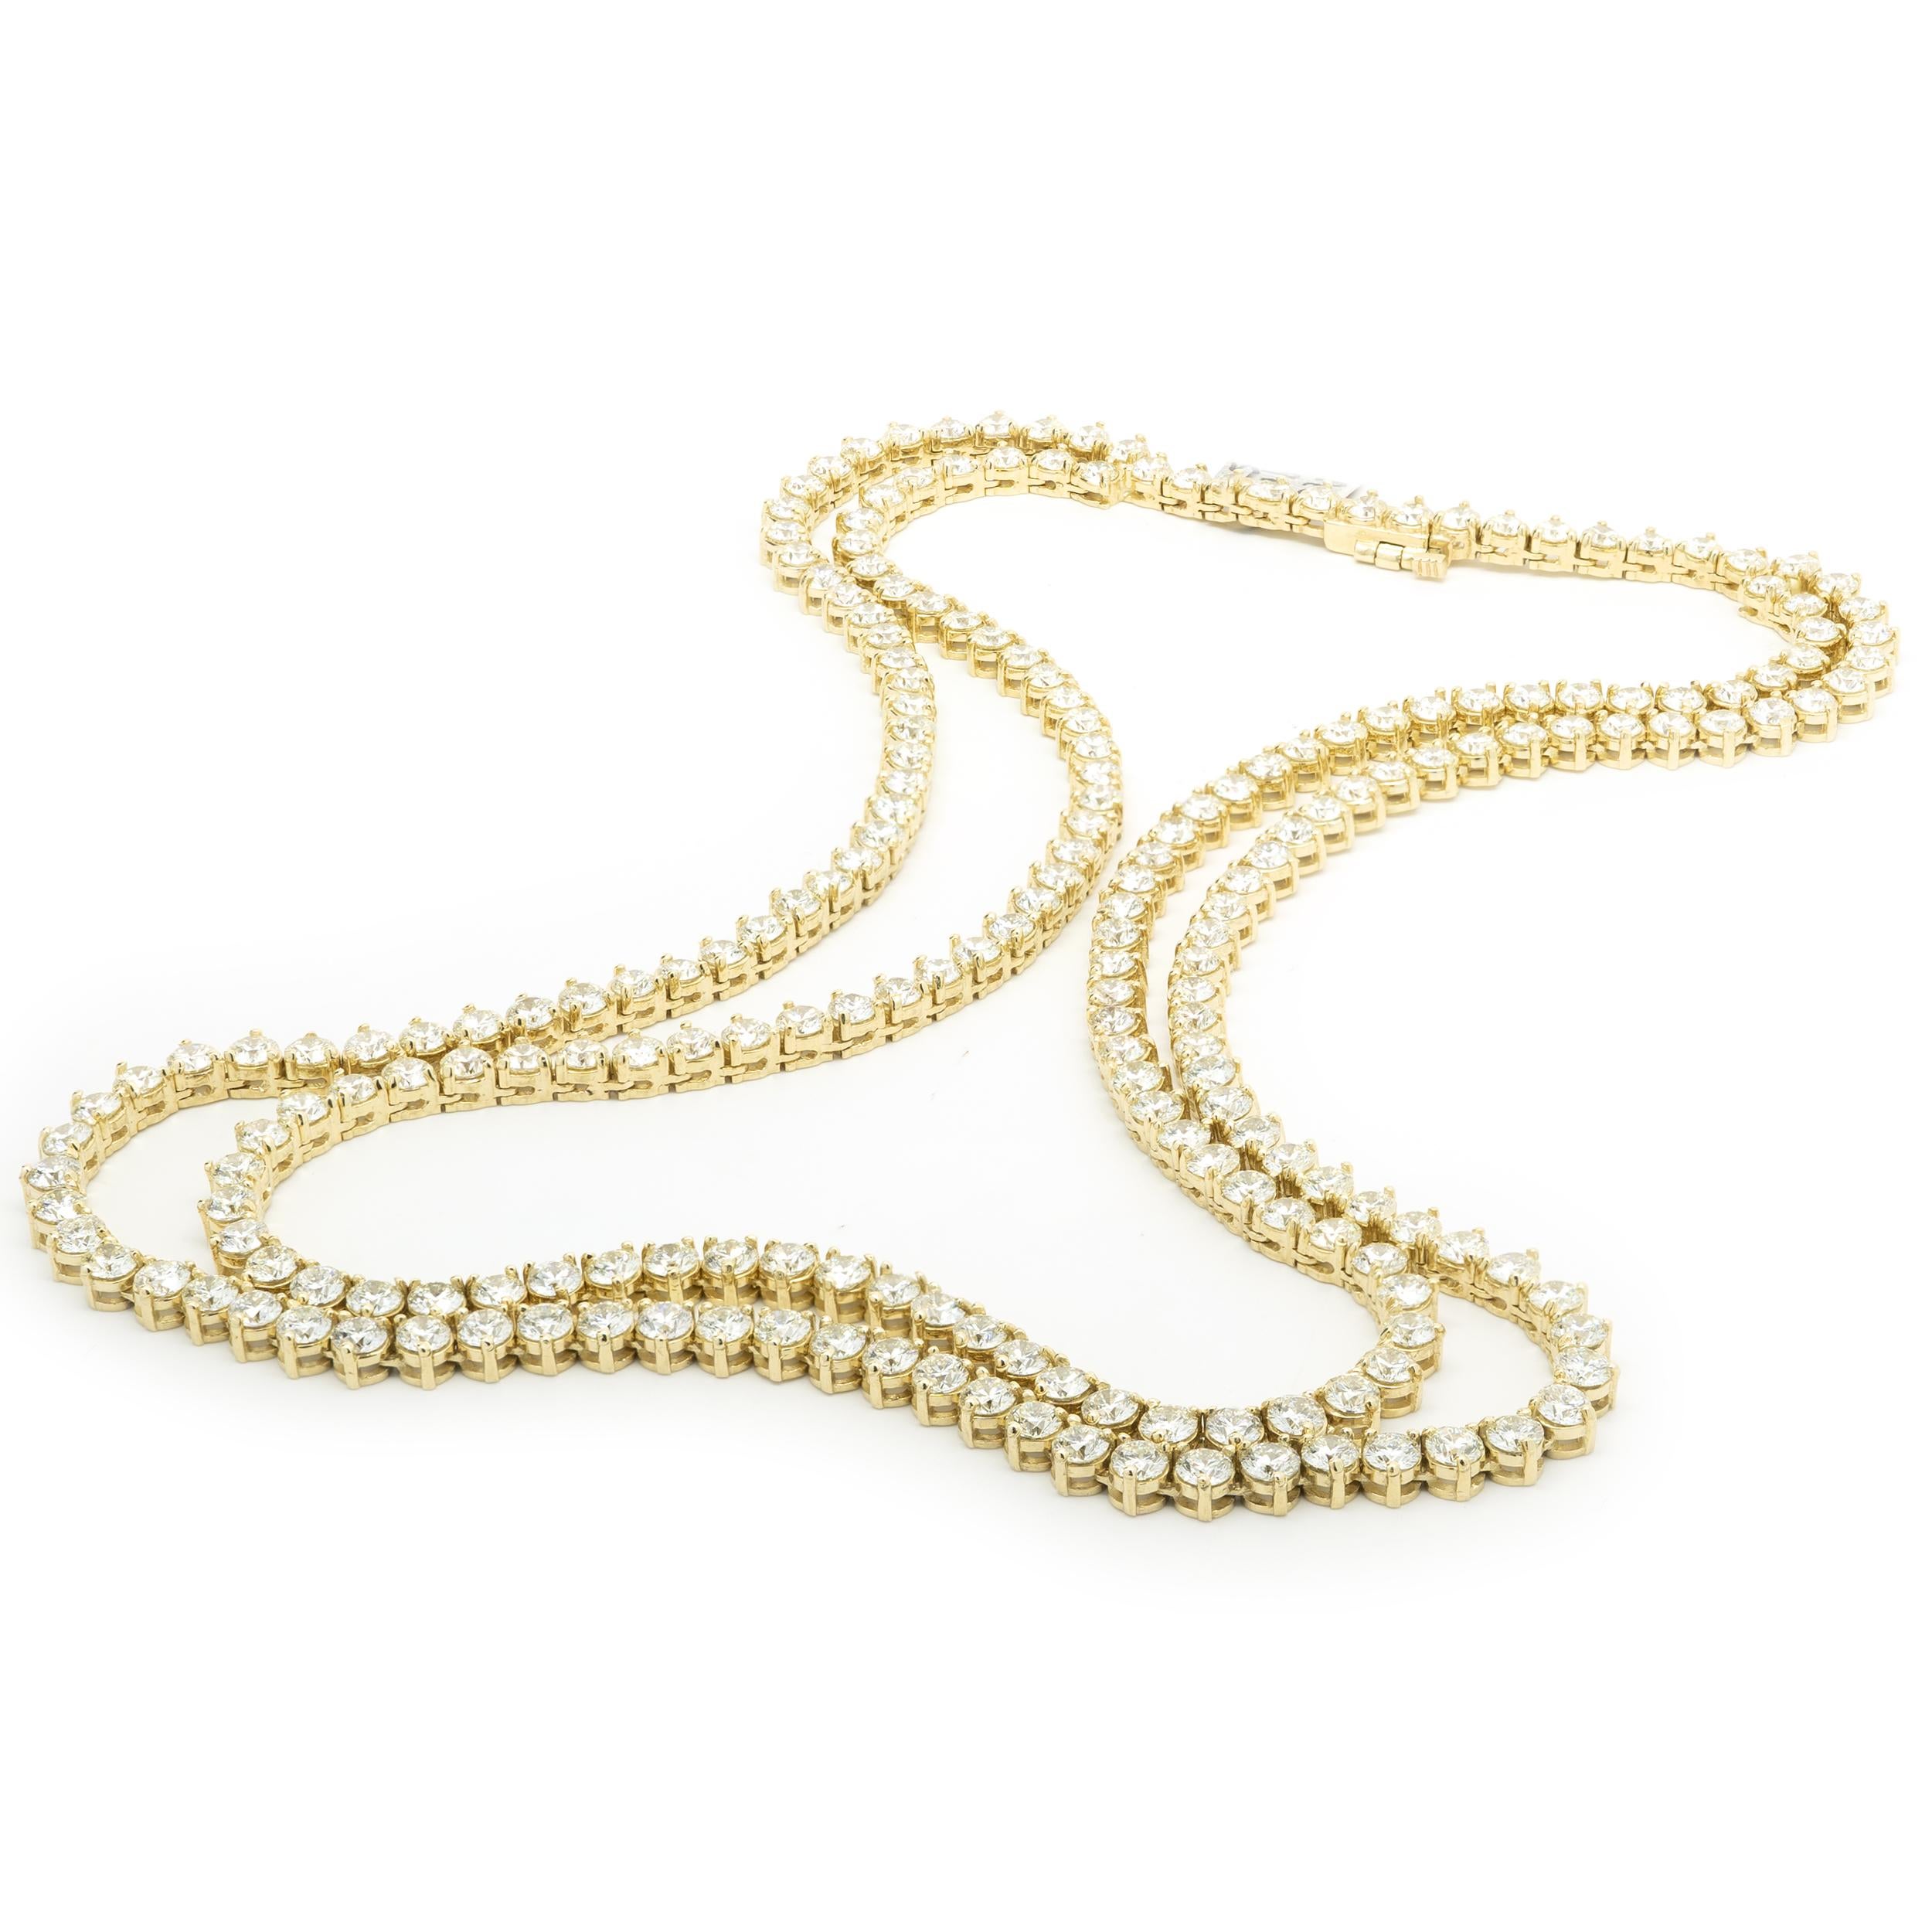 Designer: custom design
Material: 14K yellow gold
Diamonds: 227 round brilliant cut = 42.79cttw
Color: G/H
Clarity: VS1-2
Dimensions: necklace measures 20-inches in length 
Weight: 66.85 grams
